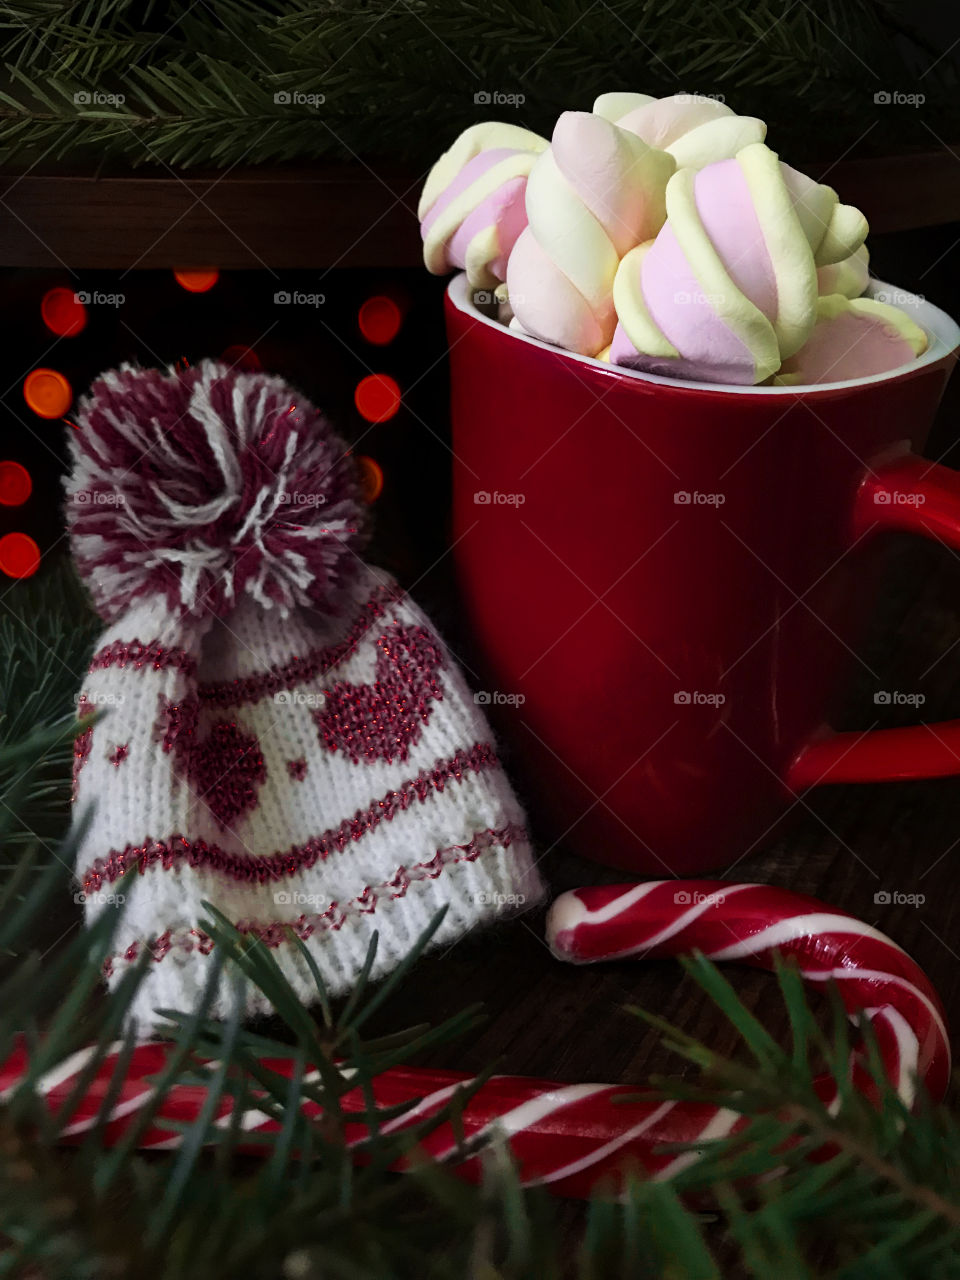 Hot coffee/cocoa with marshmallows in red cup nearby candy cane, fir tree branch and winter hat